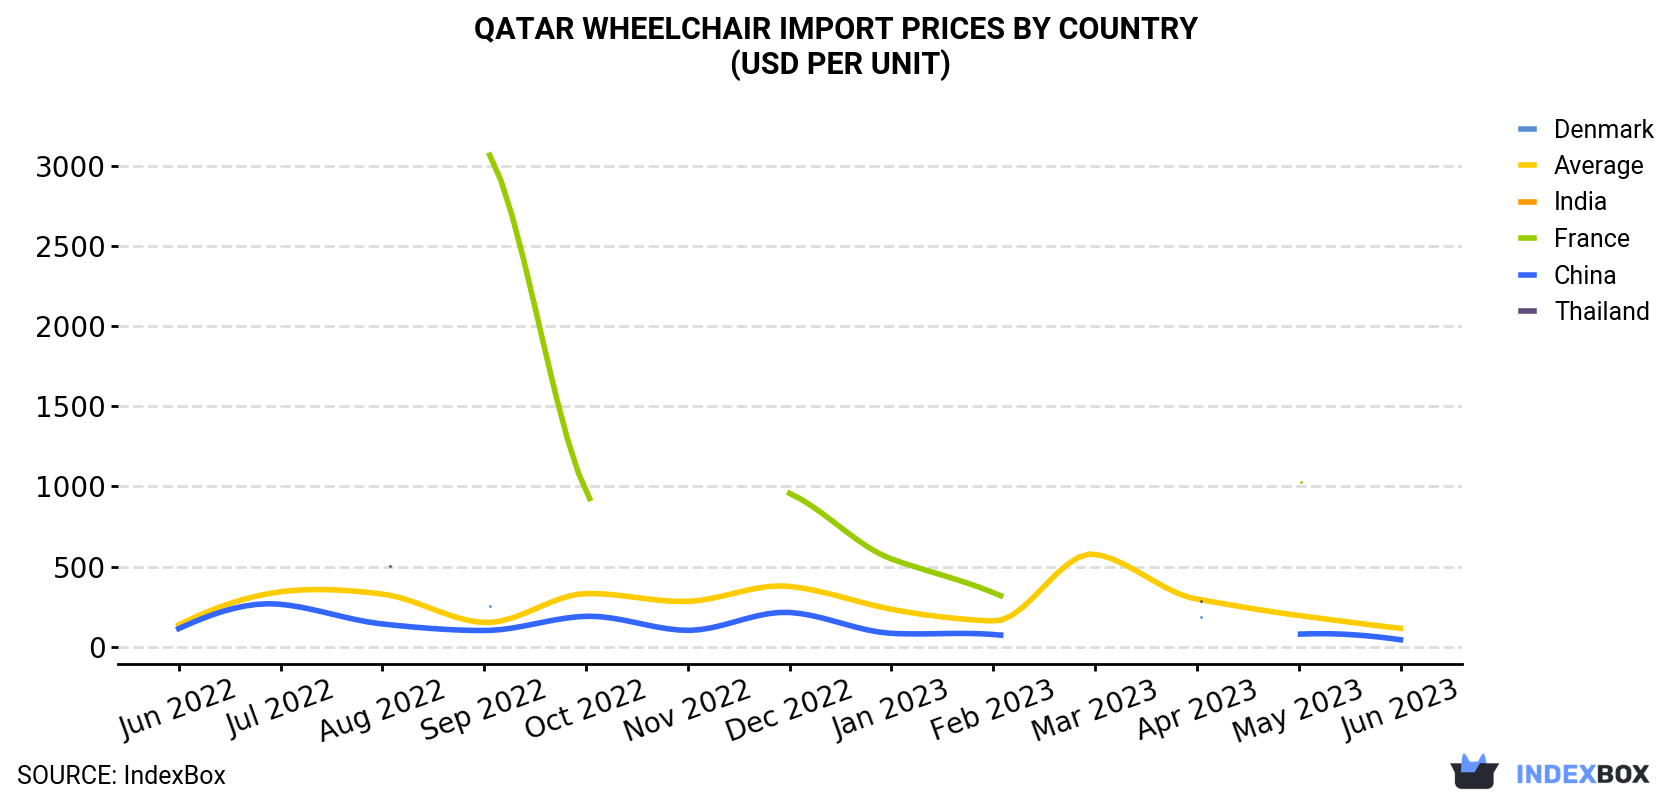 Qatar Wheelchair Import Prices By Country (USD Per Unit)